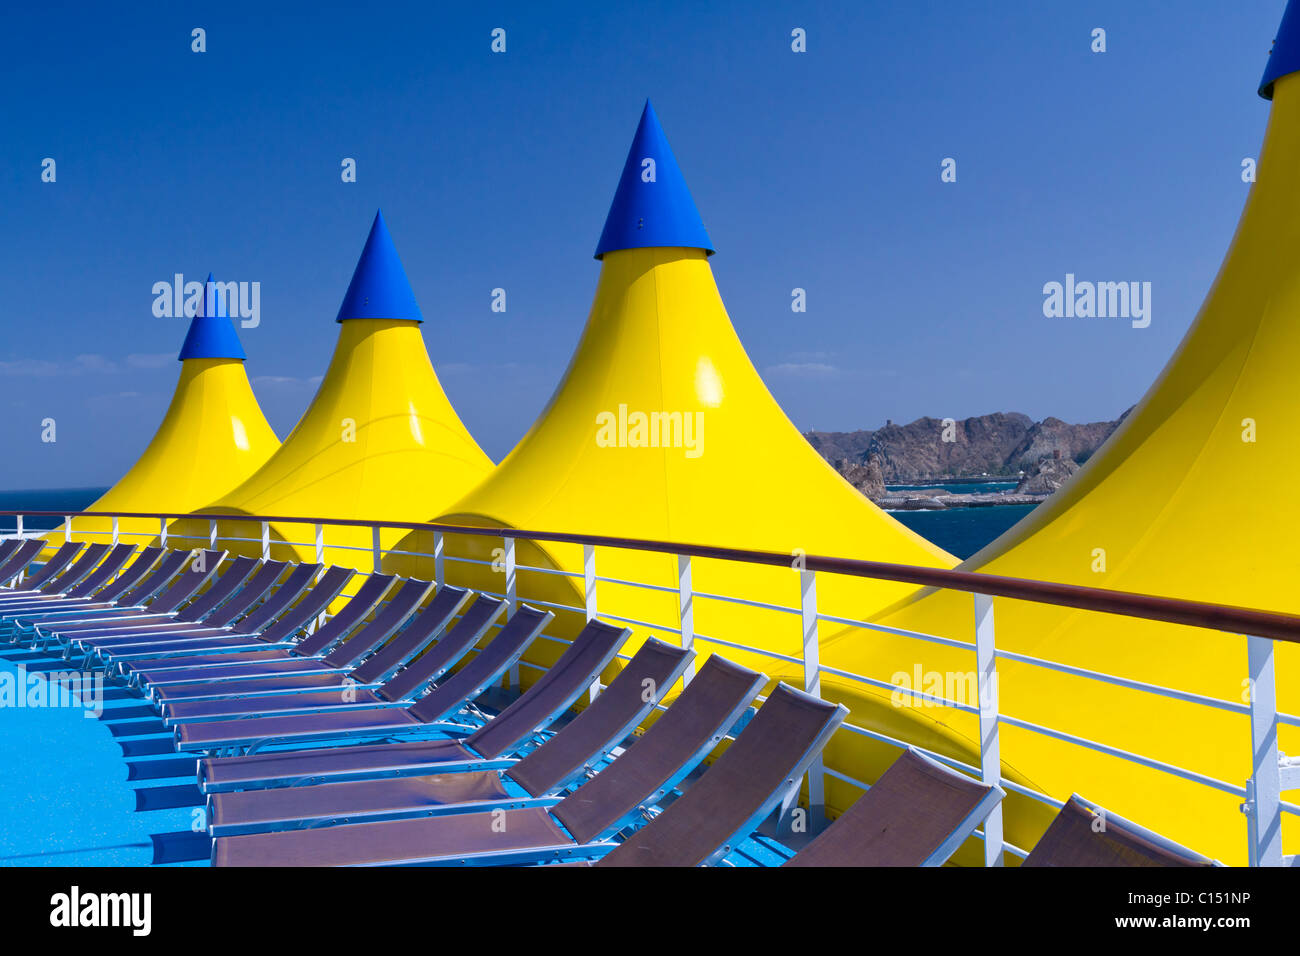 Yellow and blue canopies on the deck of the cruise ship Costa Deliziosa. Stock Photo